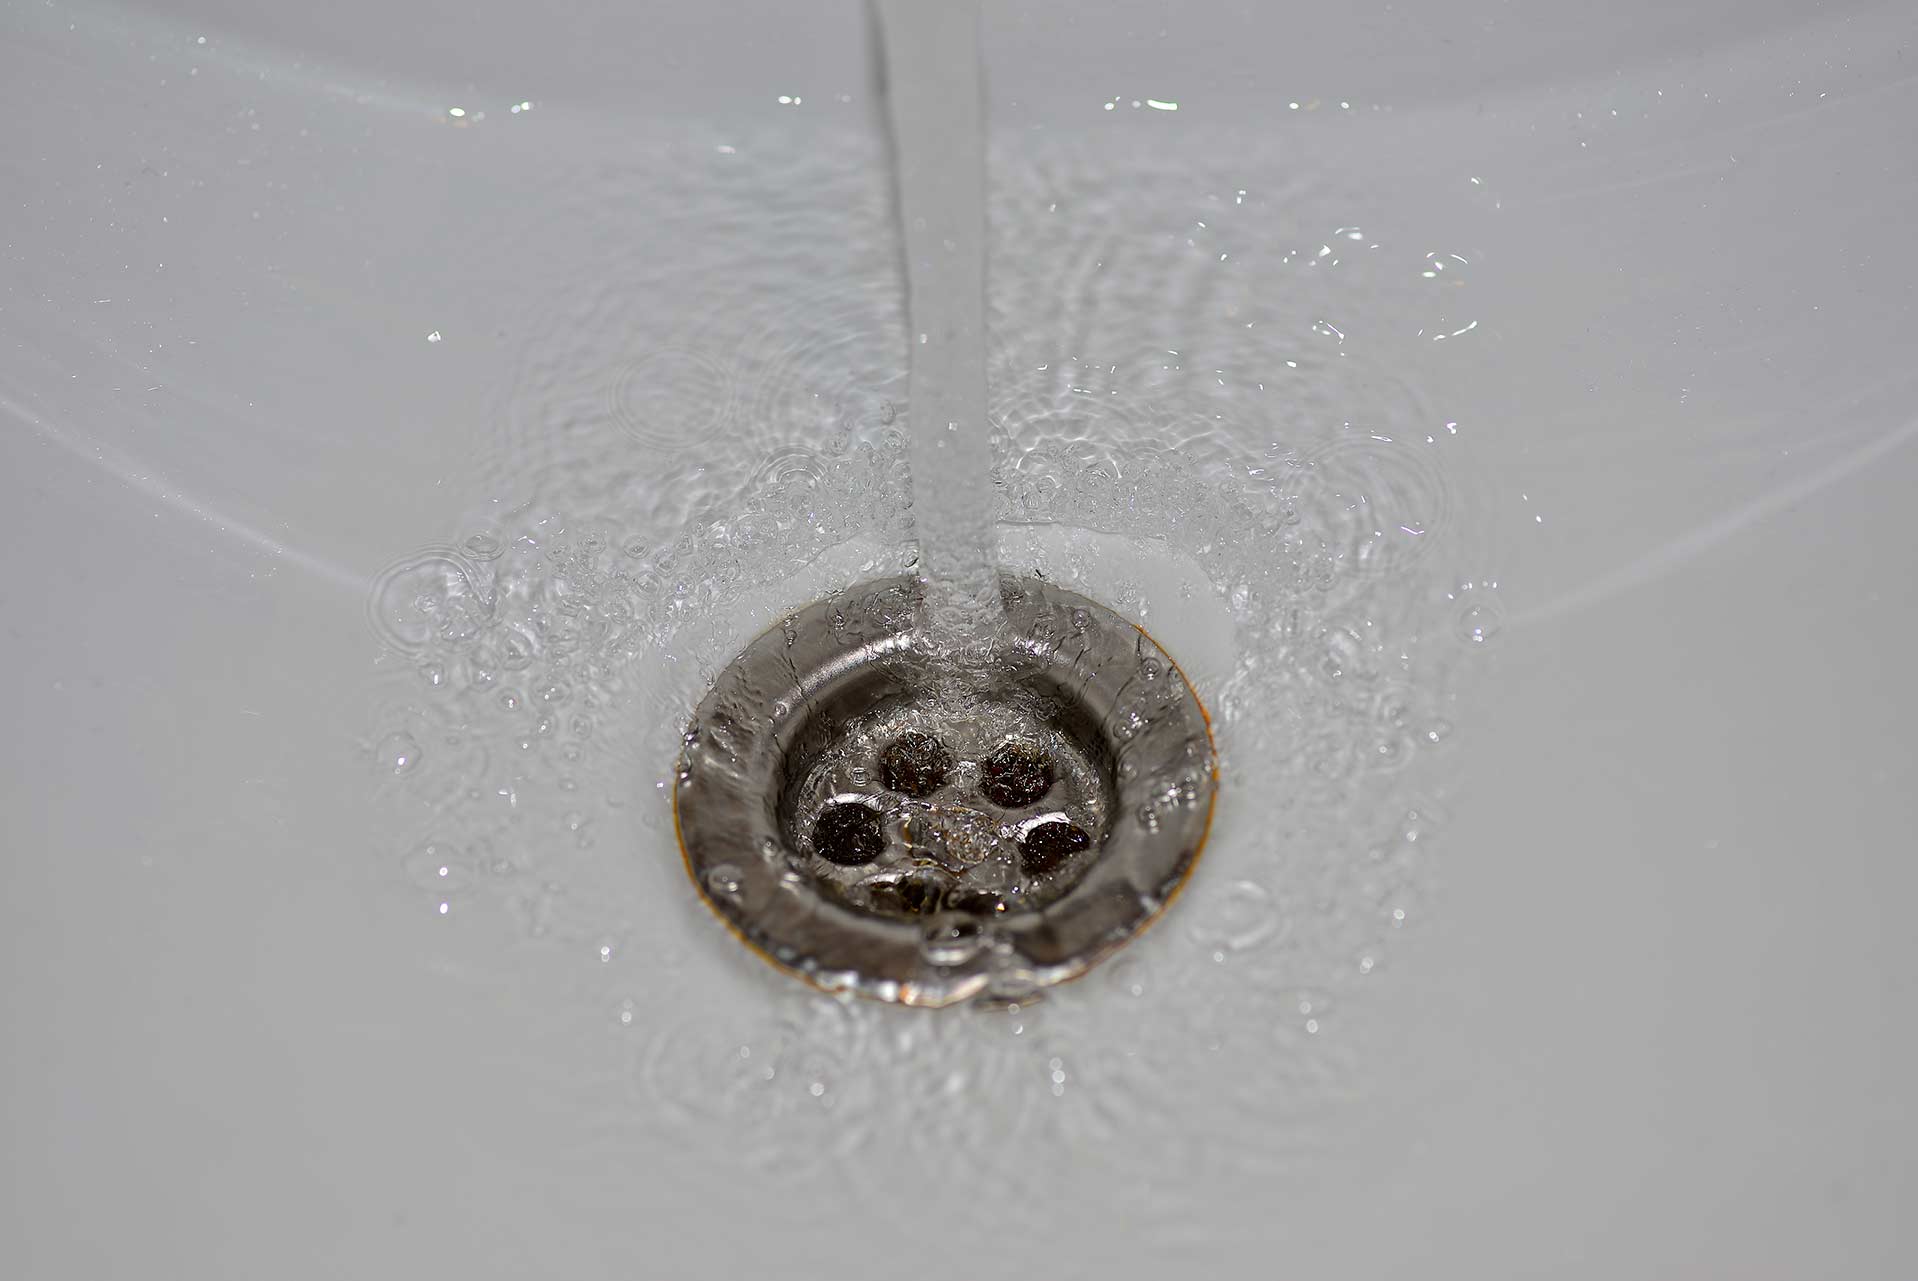 A2B Drains provides services to unblock blocked sinks and drains for properties in Haringey.